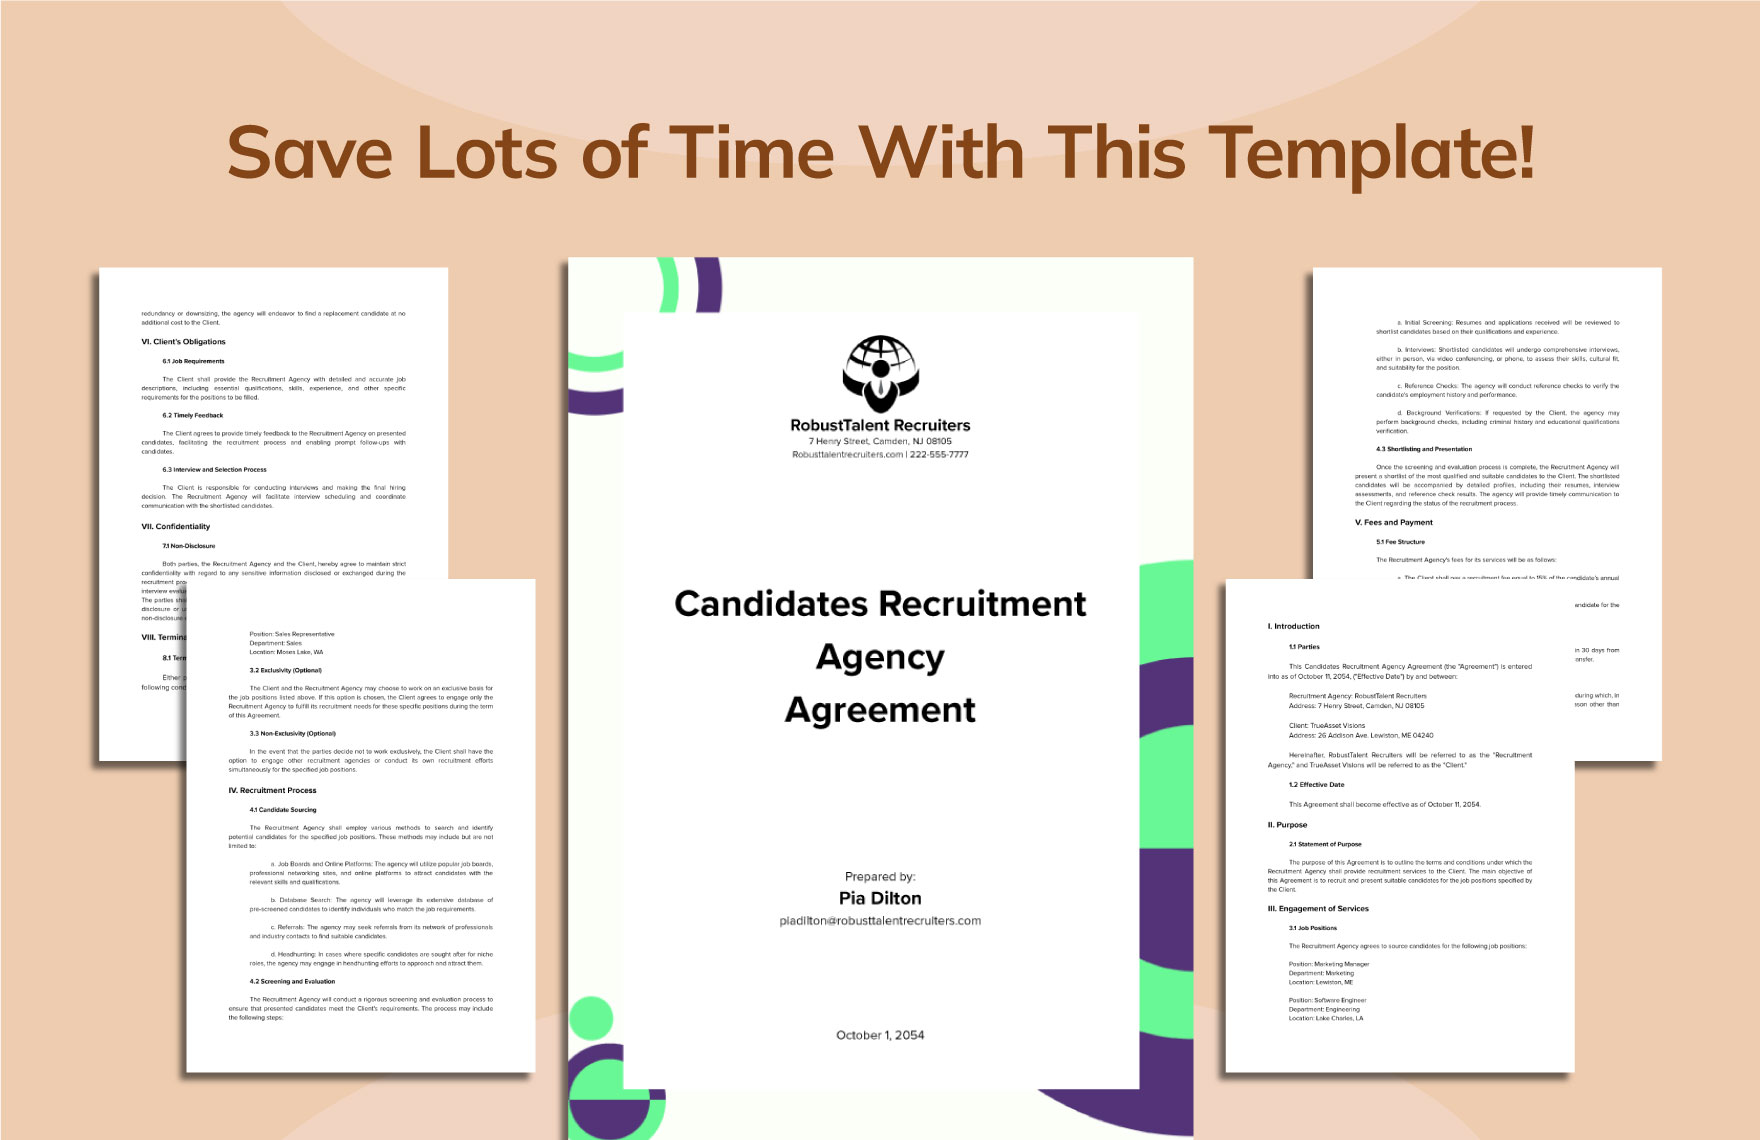 Candidates Recruitment Agency Agreement